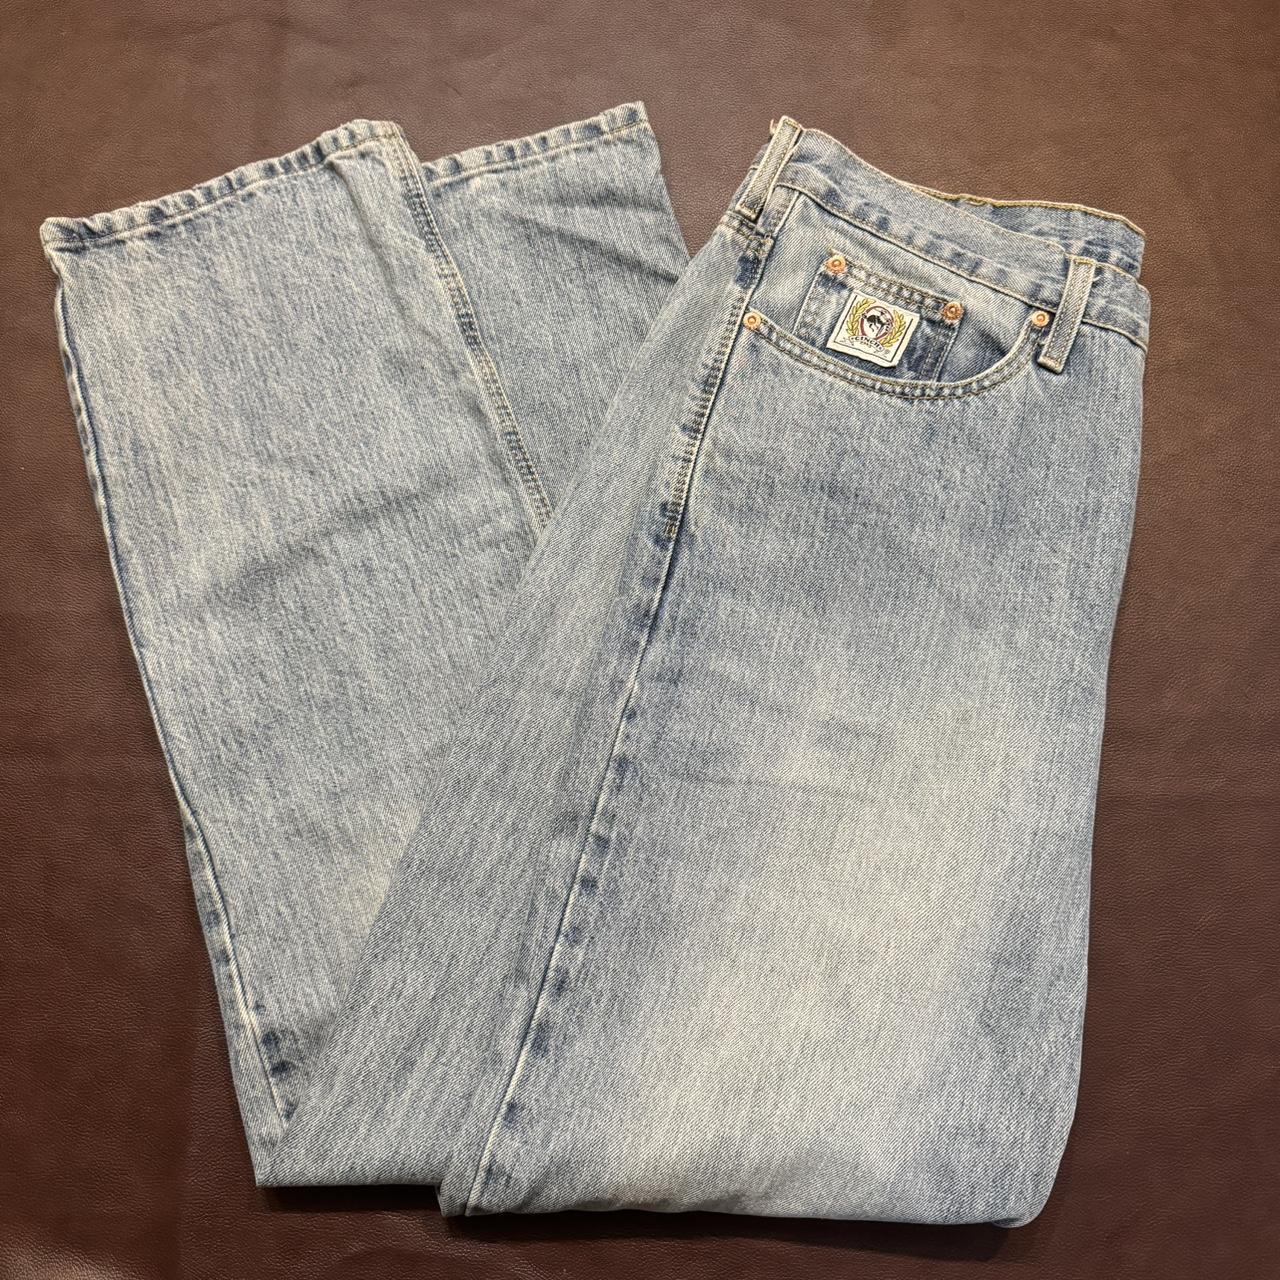 Cinch Bootcut Jeans Size 34/34 Leg Opening 8.5 Inches - Depop